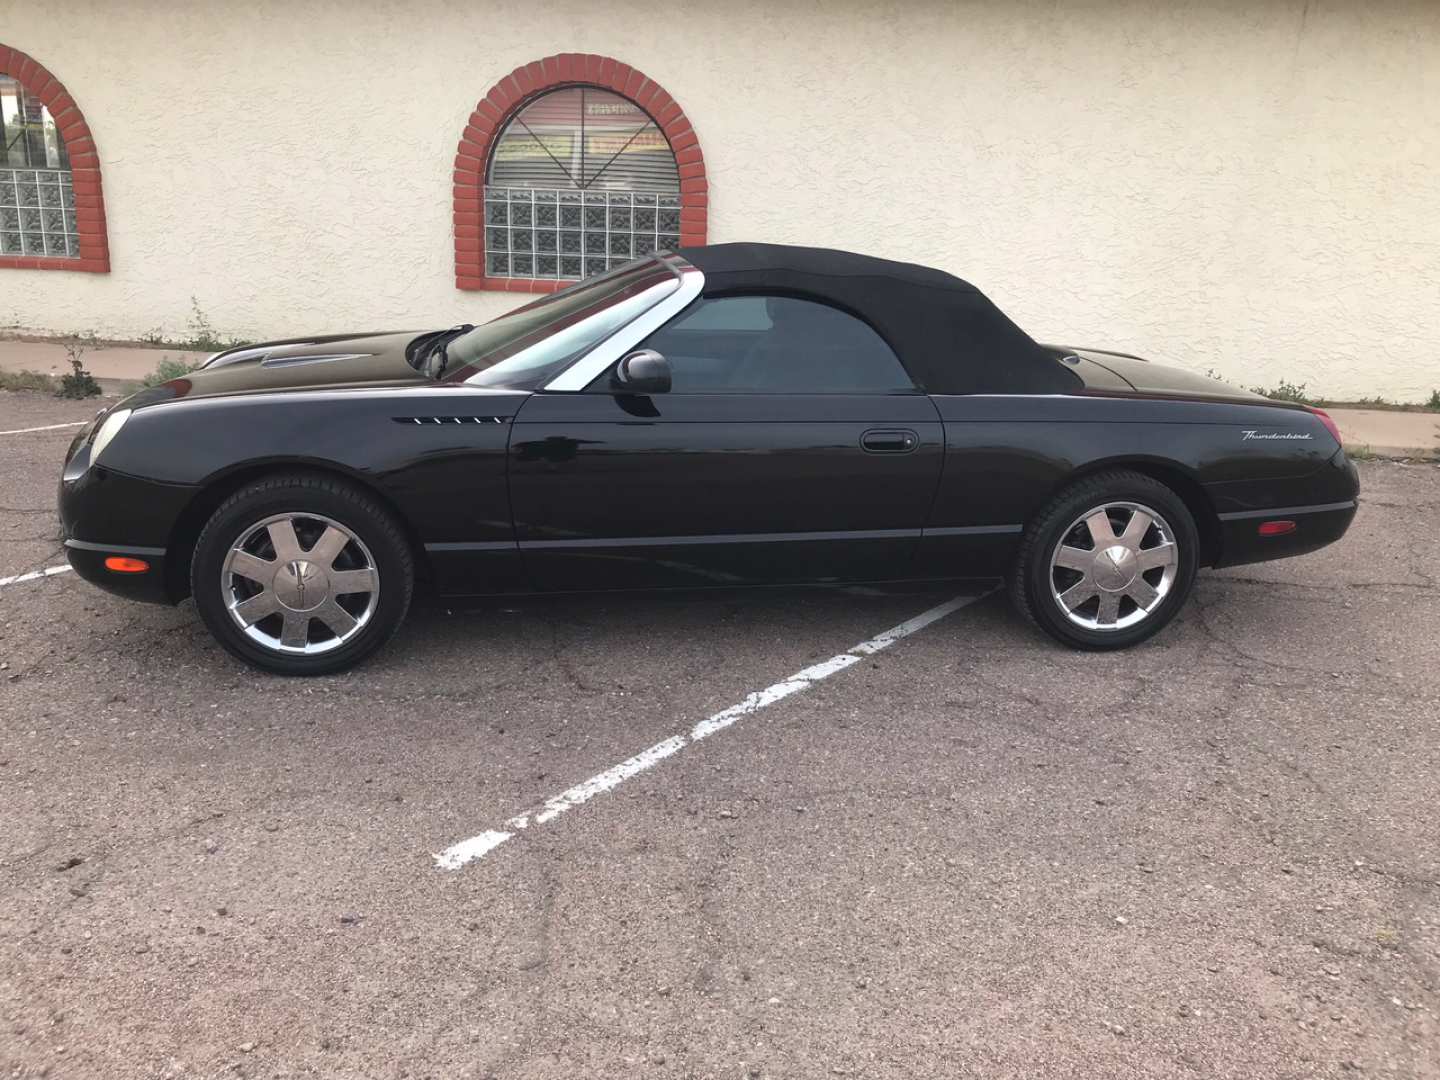 3rd Image of a 2002 FORD THUNDERBIRD DELUXE